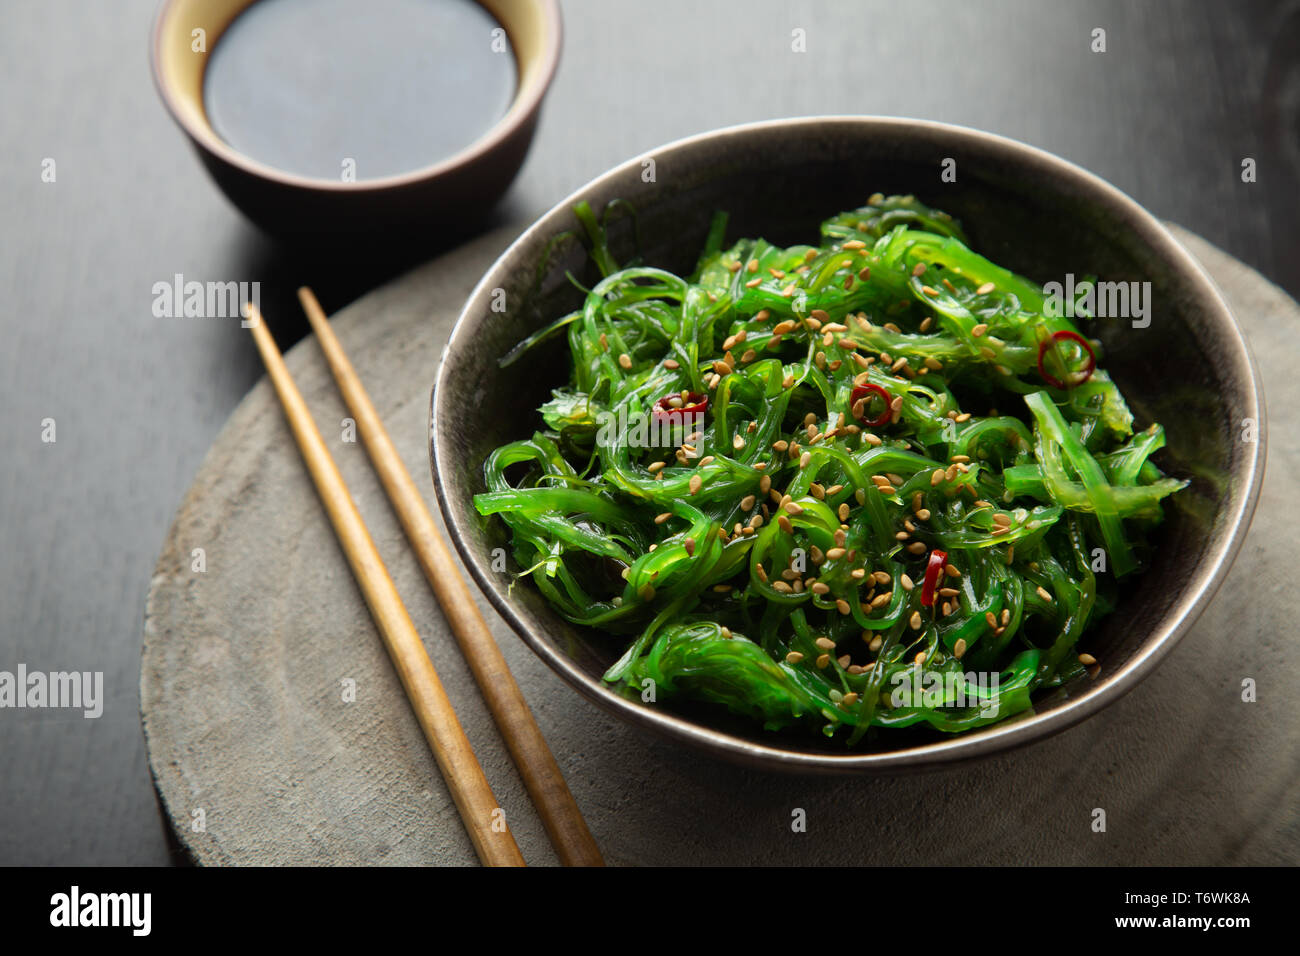 Wakame seaweed salad with sesame seeds and chili pepper in a bowl on a wooden slice Stock Photo